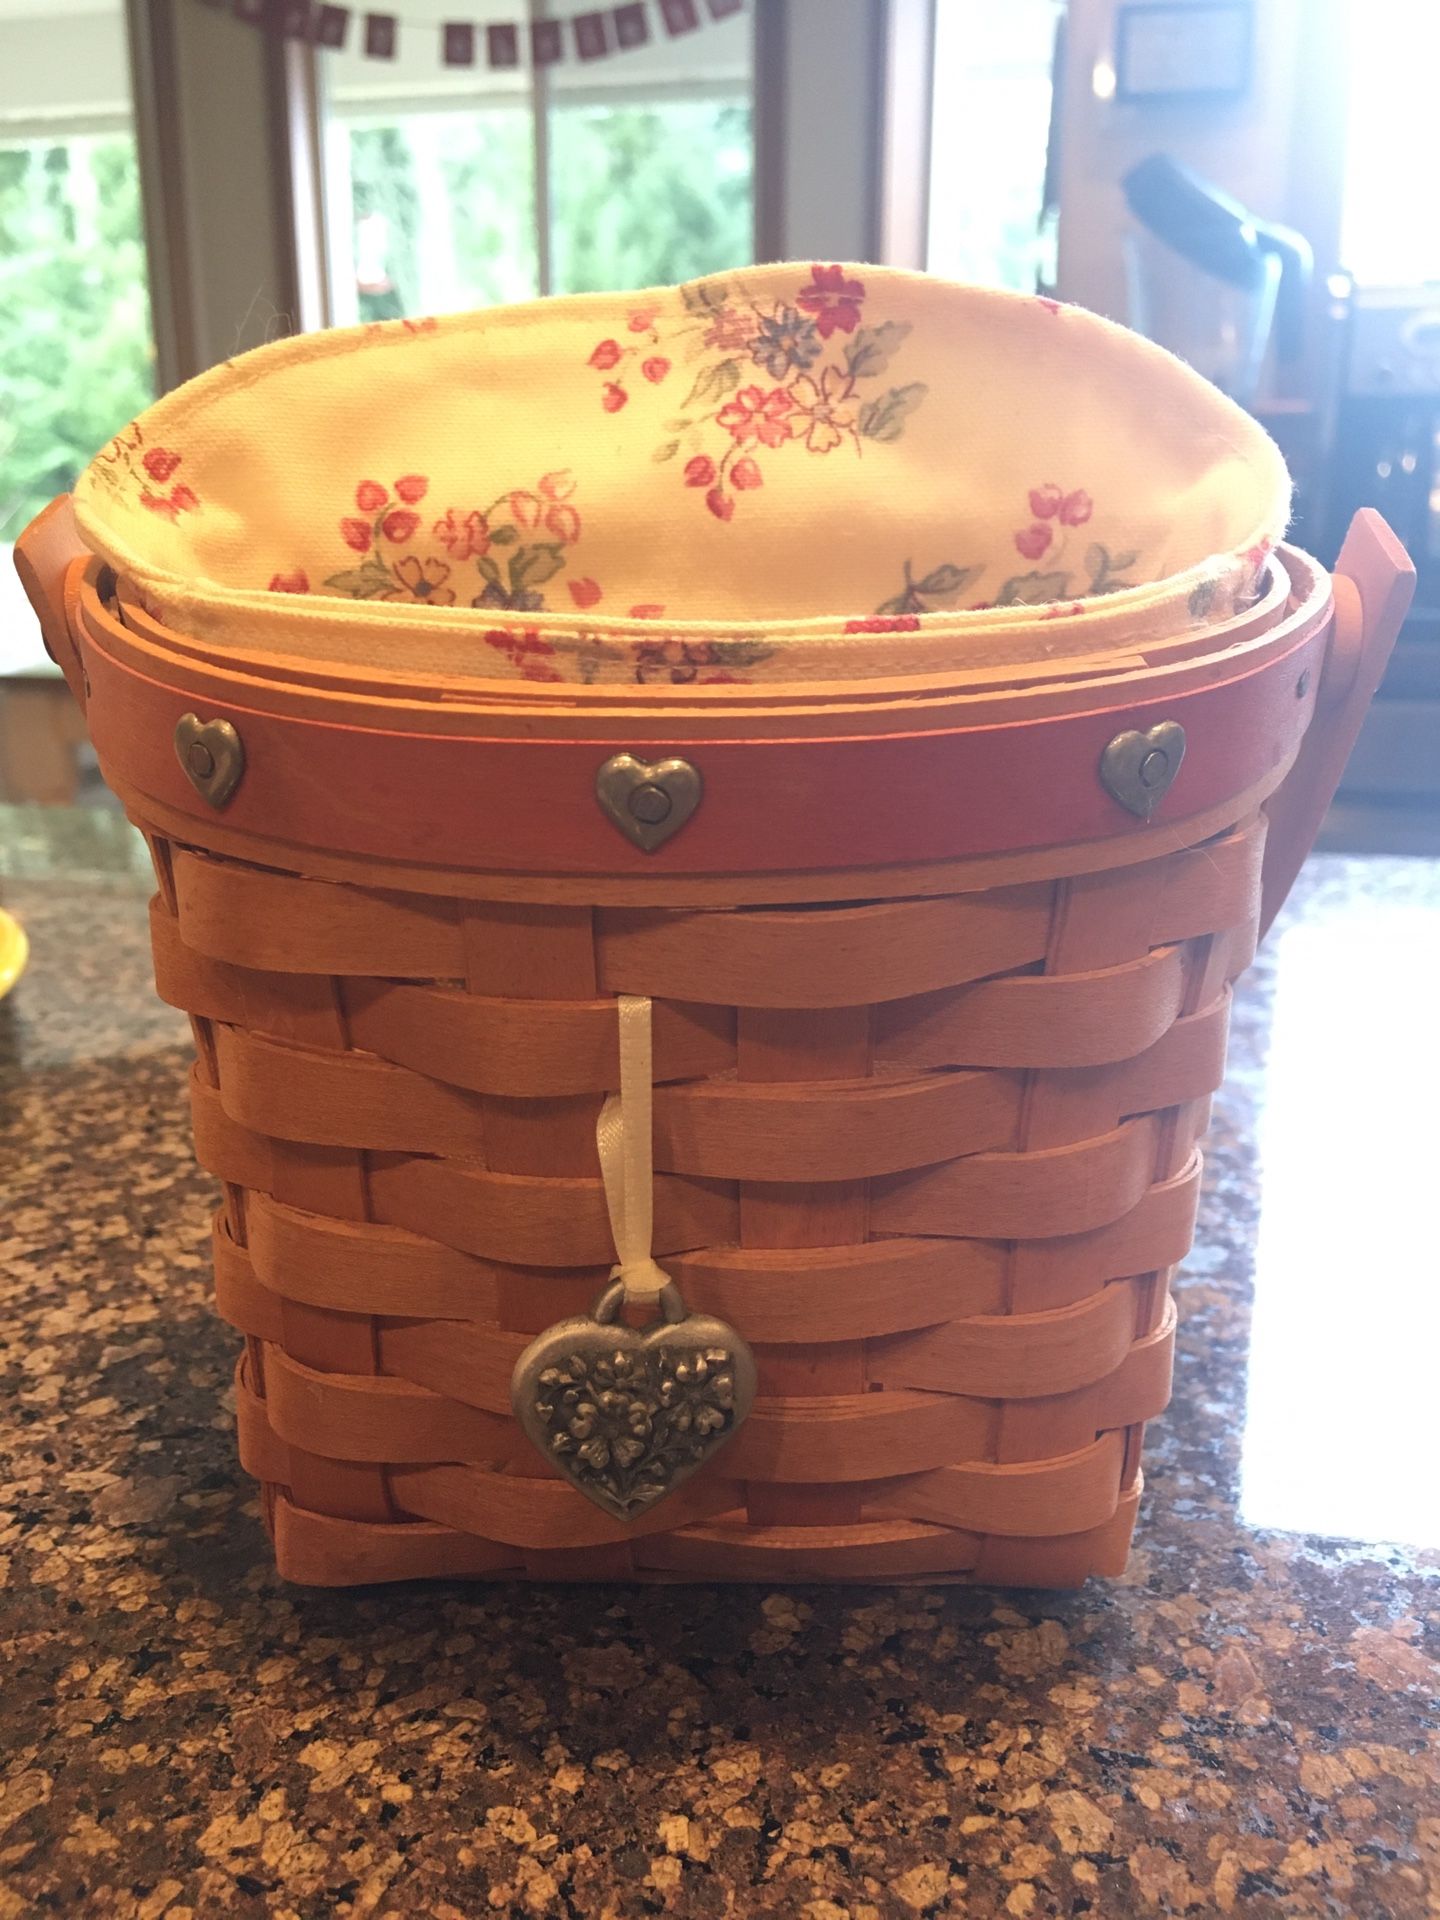 2001 Longaberger sweetheart basket w/ tie on, protector and floral liner